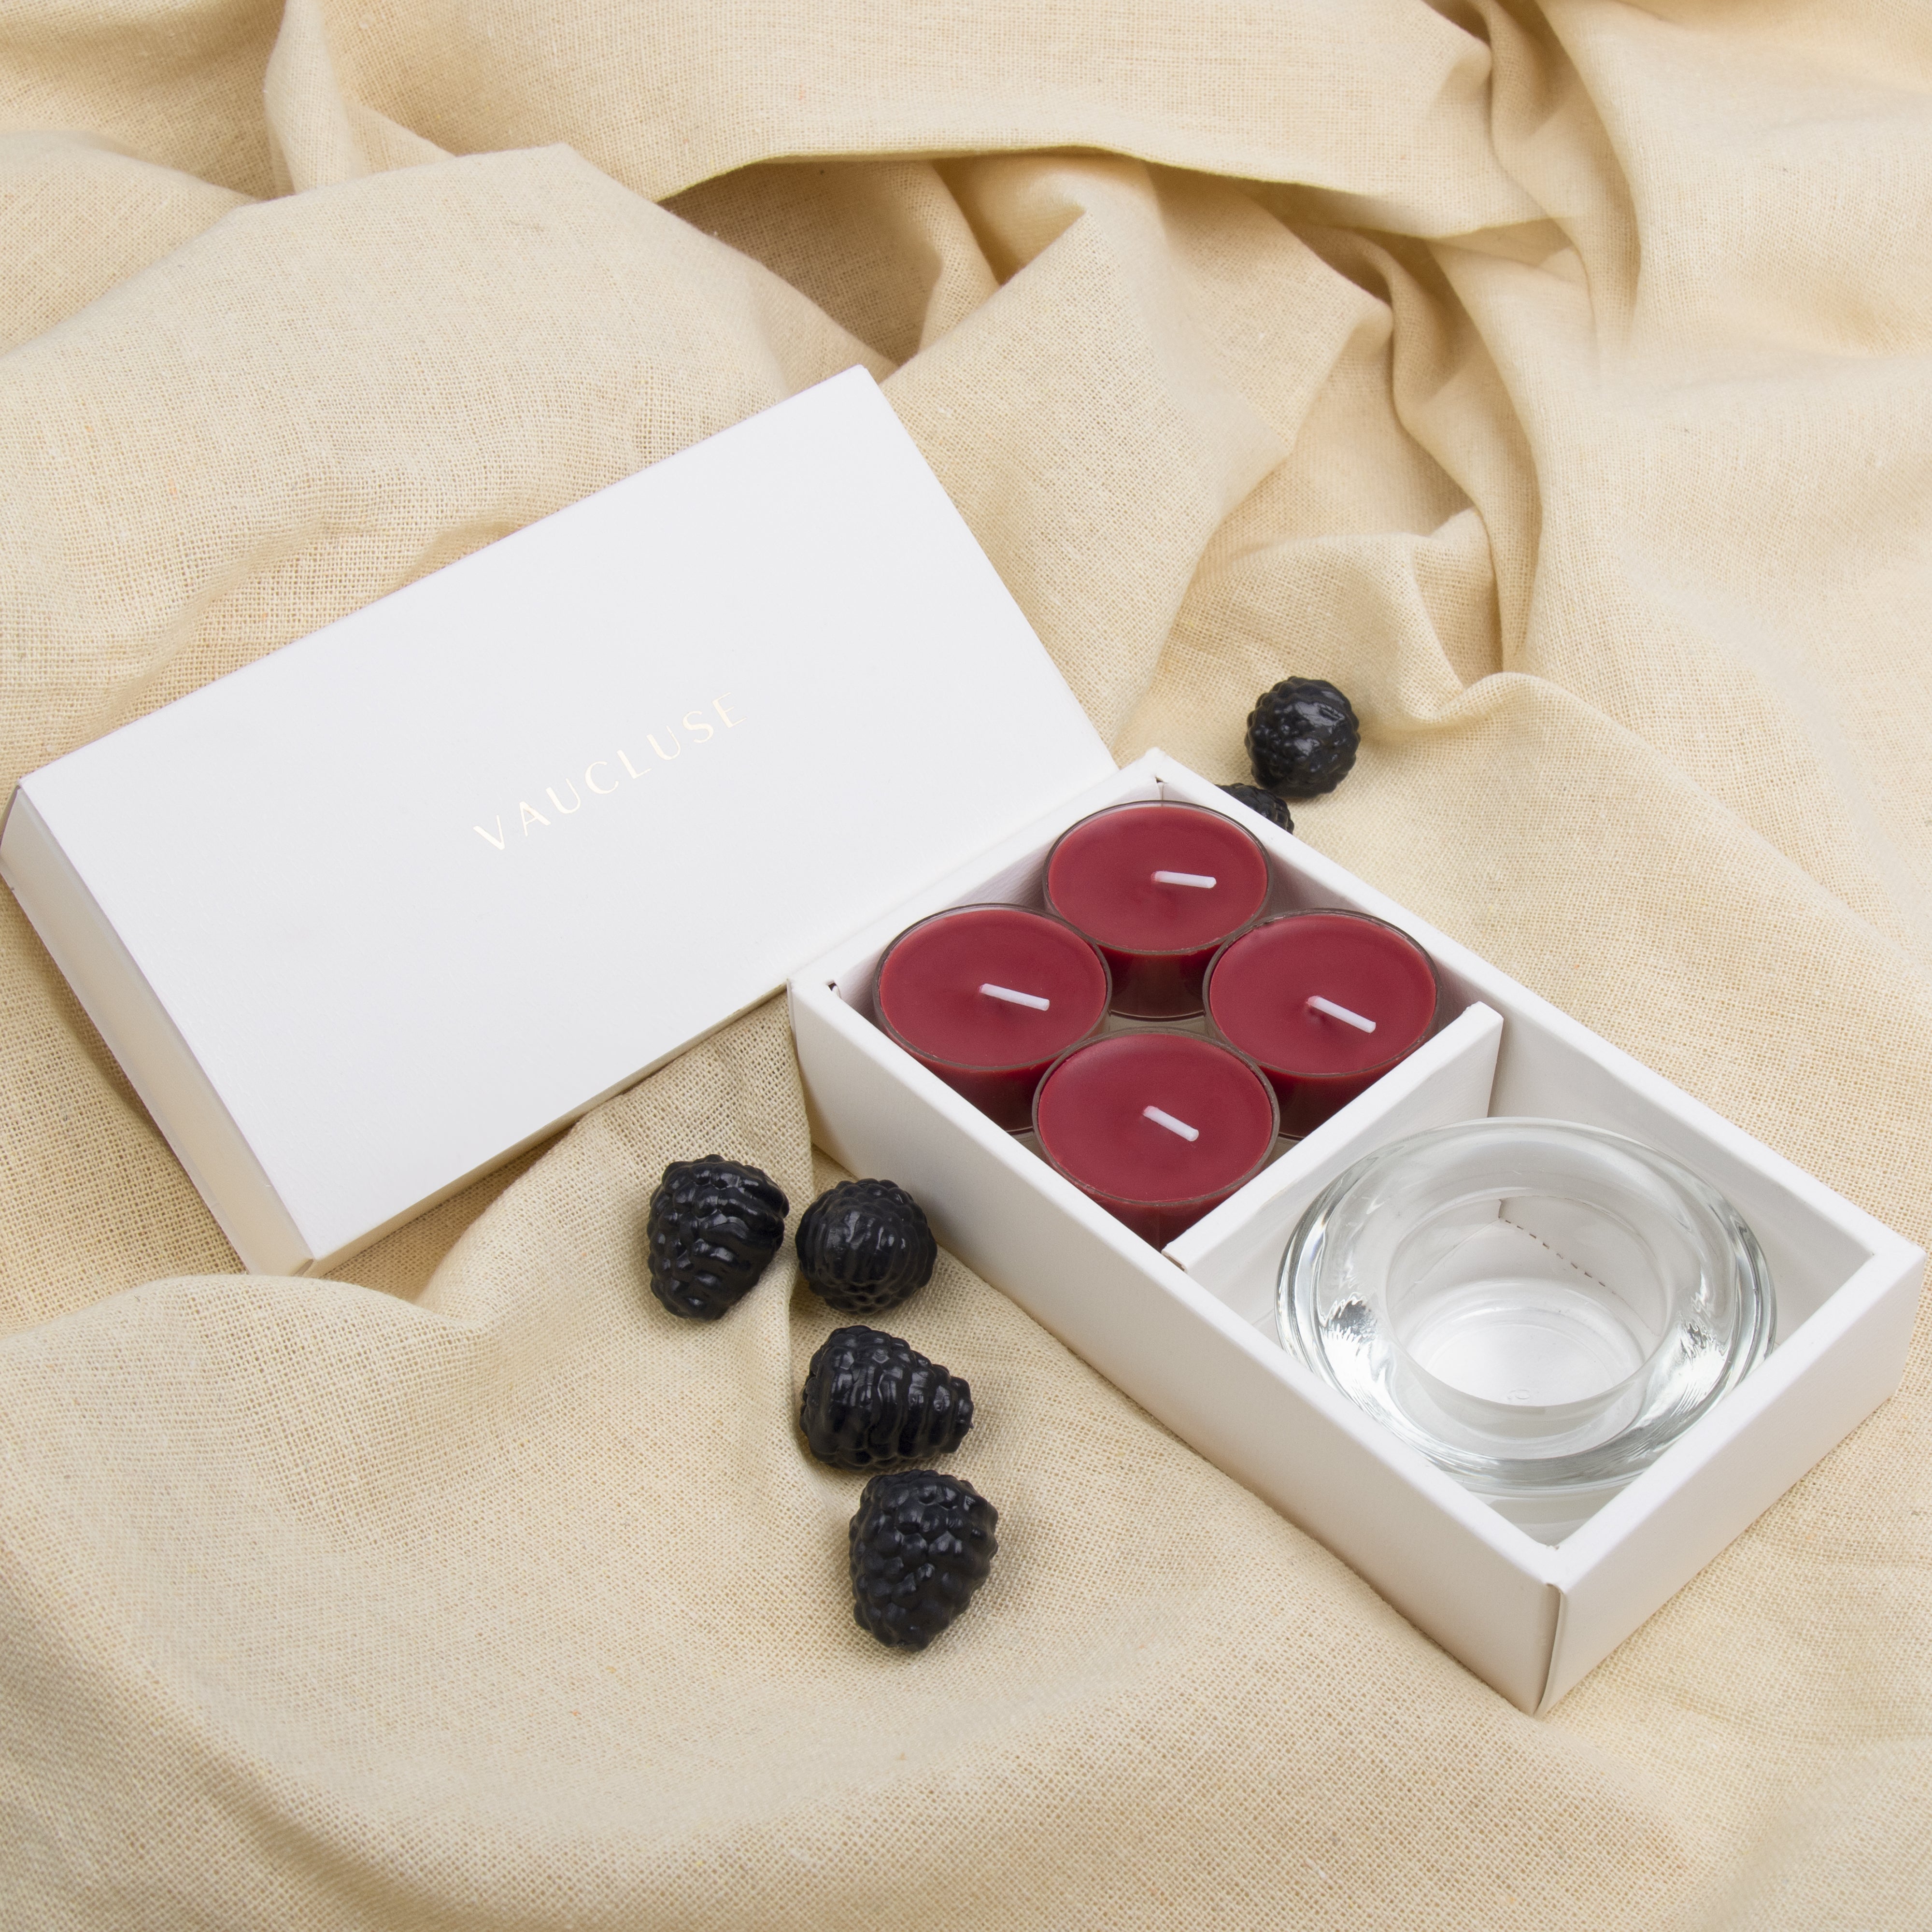 Blackberry Tealights and Candle Holder Set - VAUCLUSE